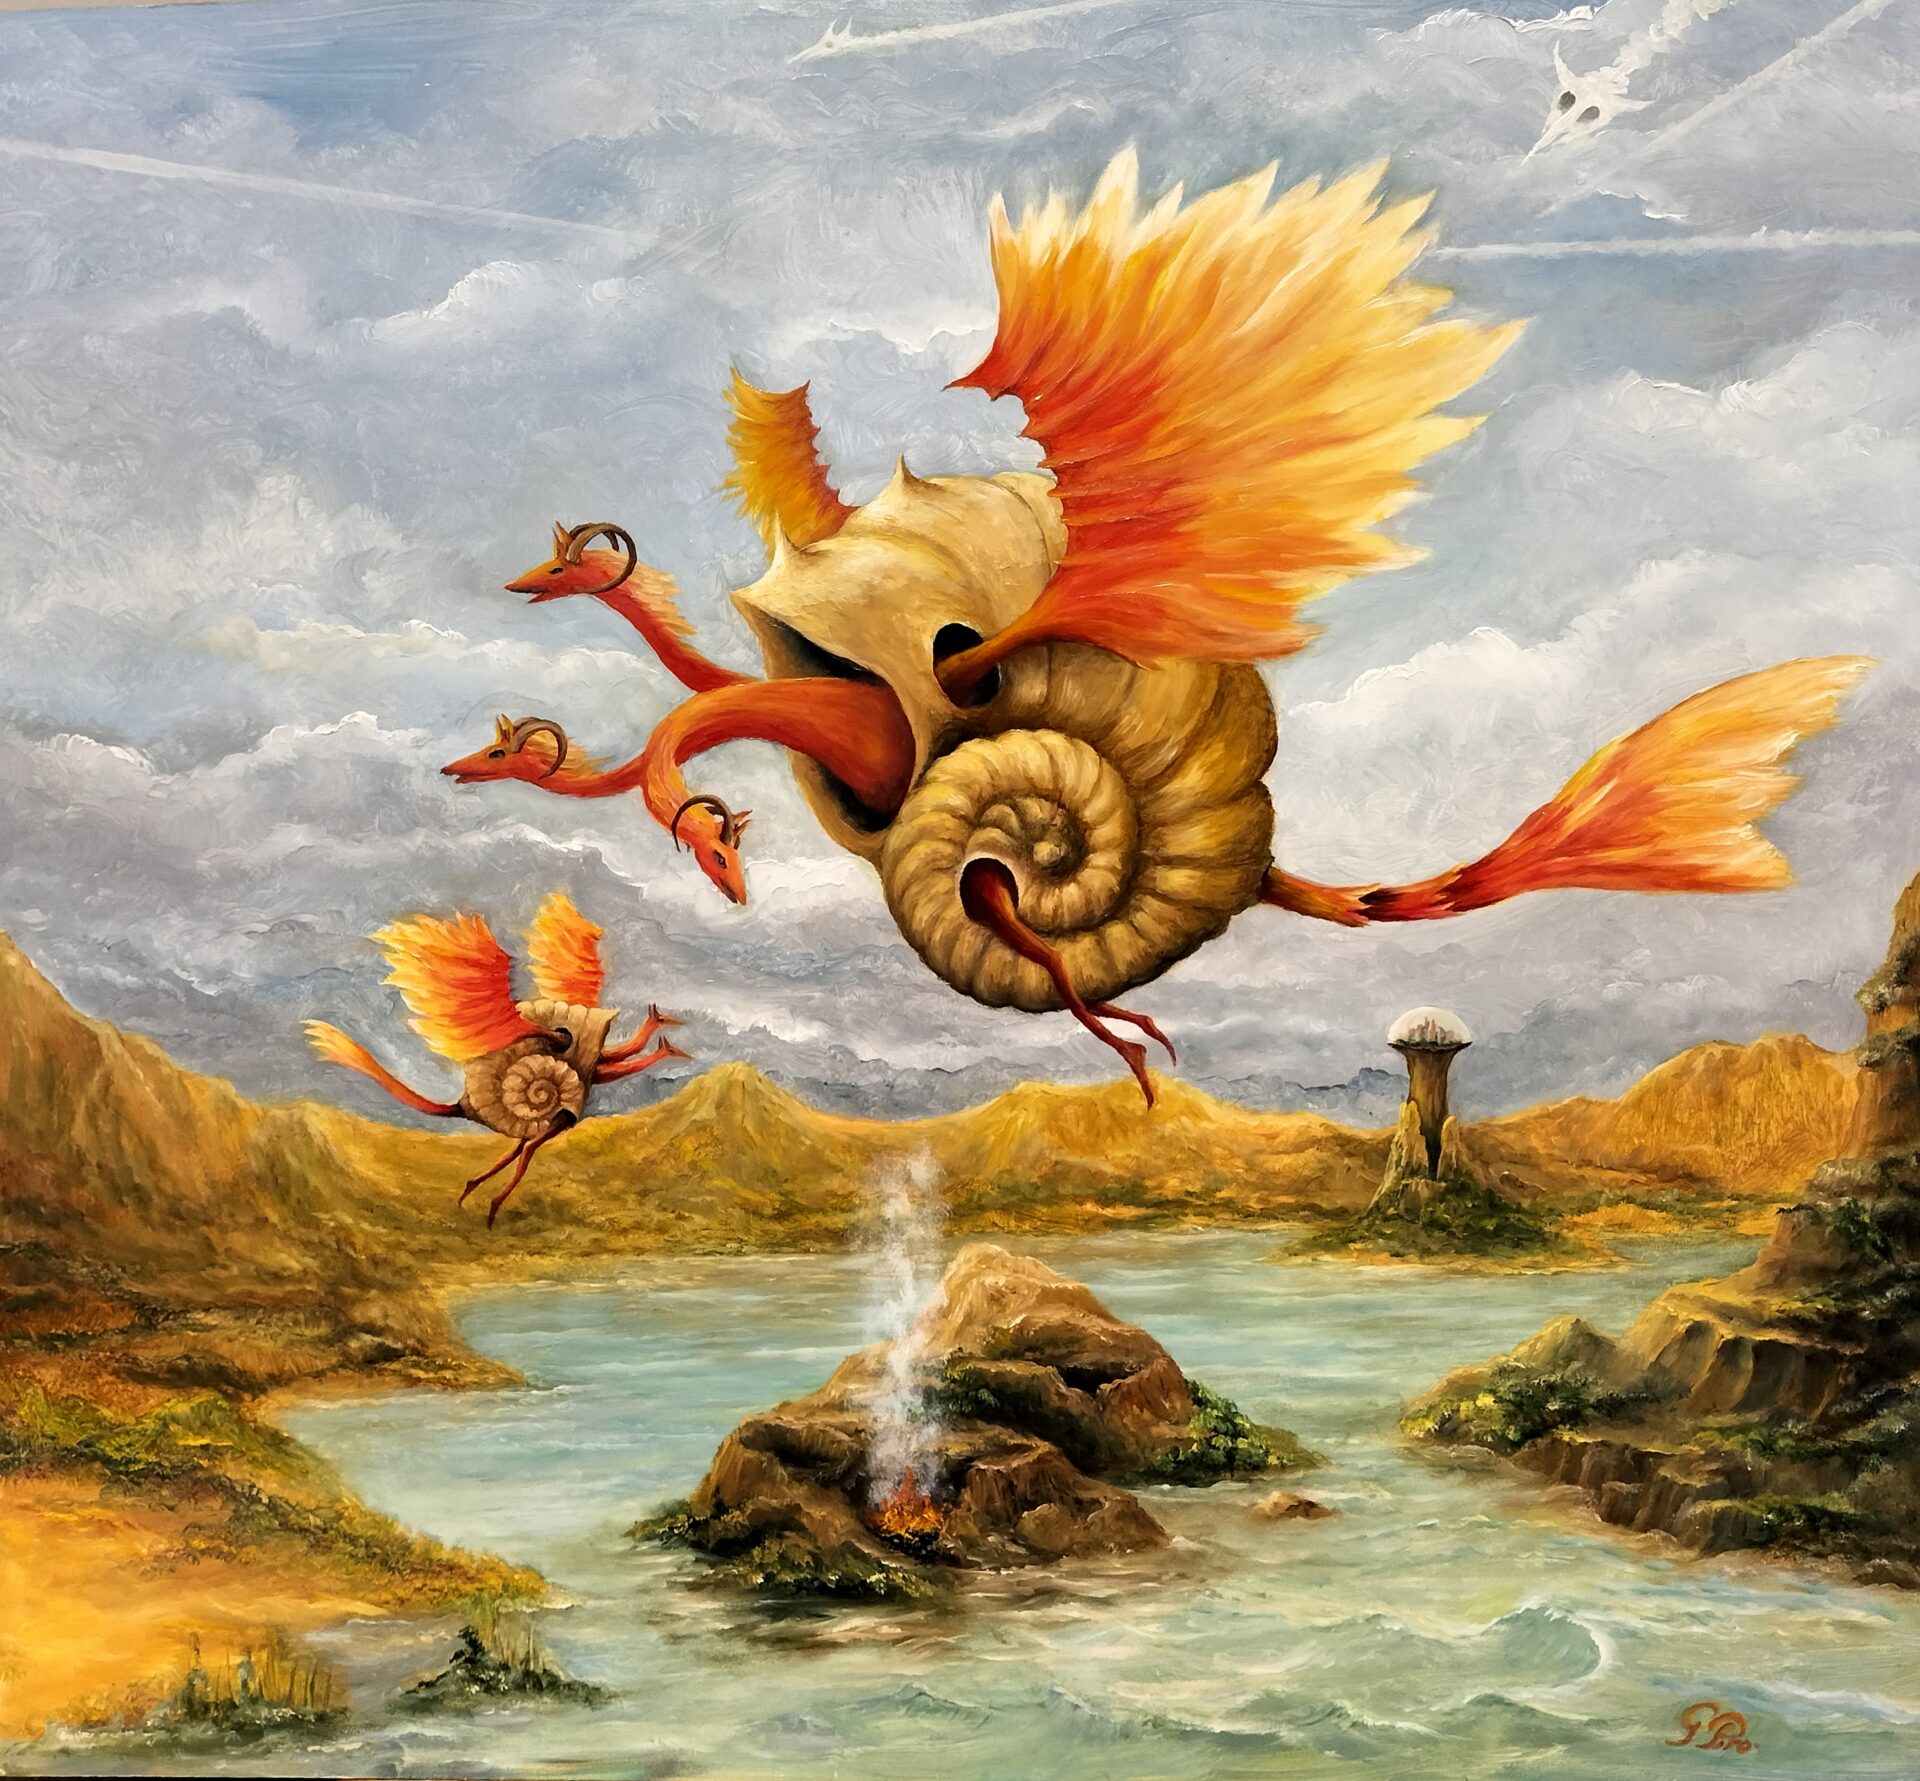 gregory pyra piro, oil painting, surrealist, landscape, planet, solar system, flying dragons, shell, vests, snails, three headed dragon, dragon with horns, two headed dragon, demons, sky, gray clouds, large lake, islands, erupting volcano, dome city, grass, bushes, trees